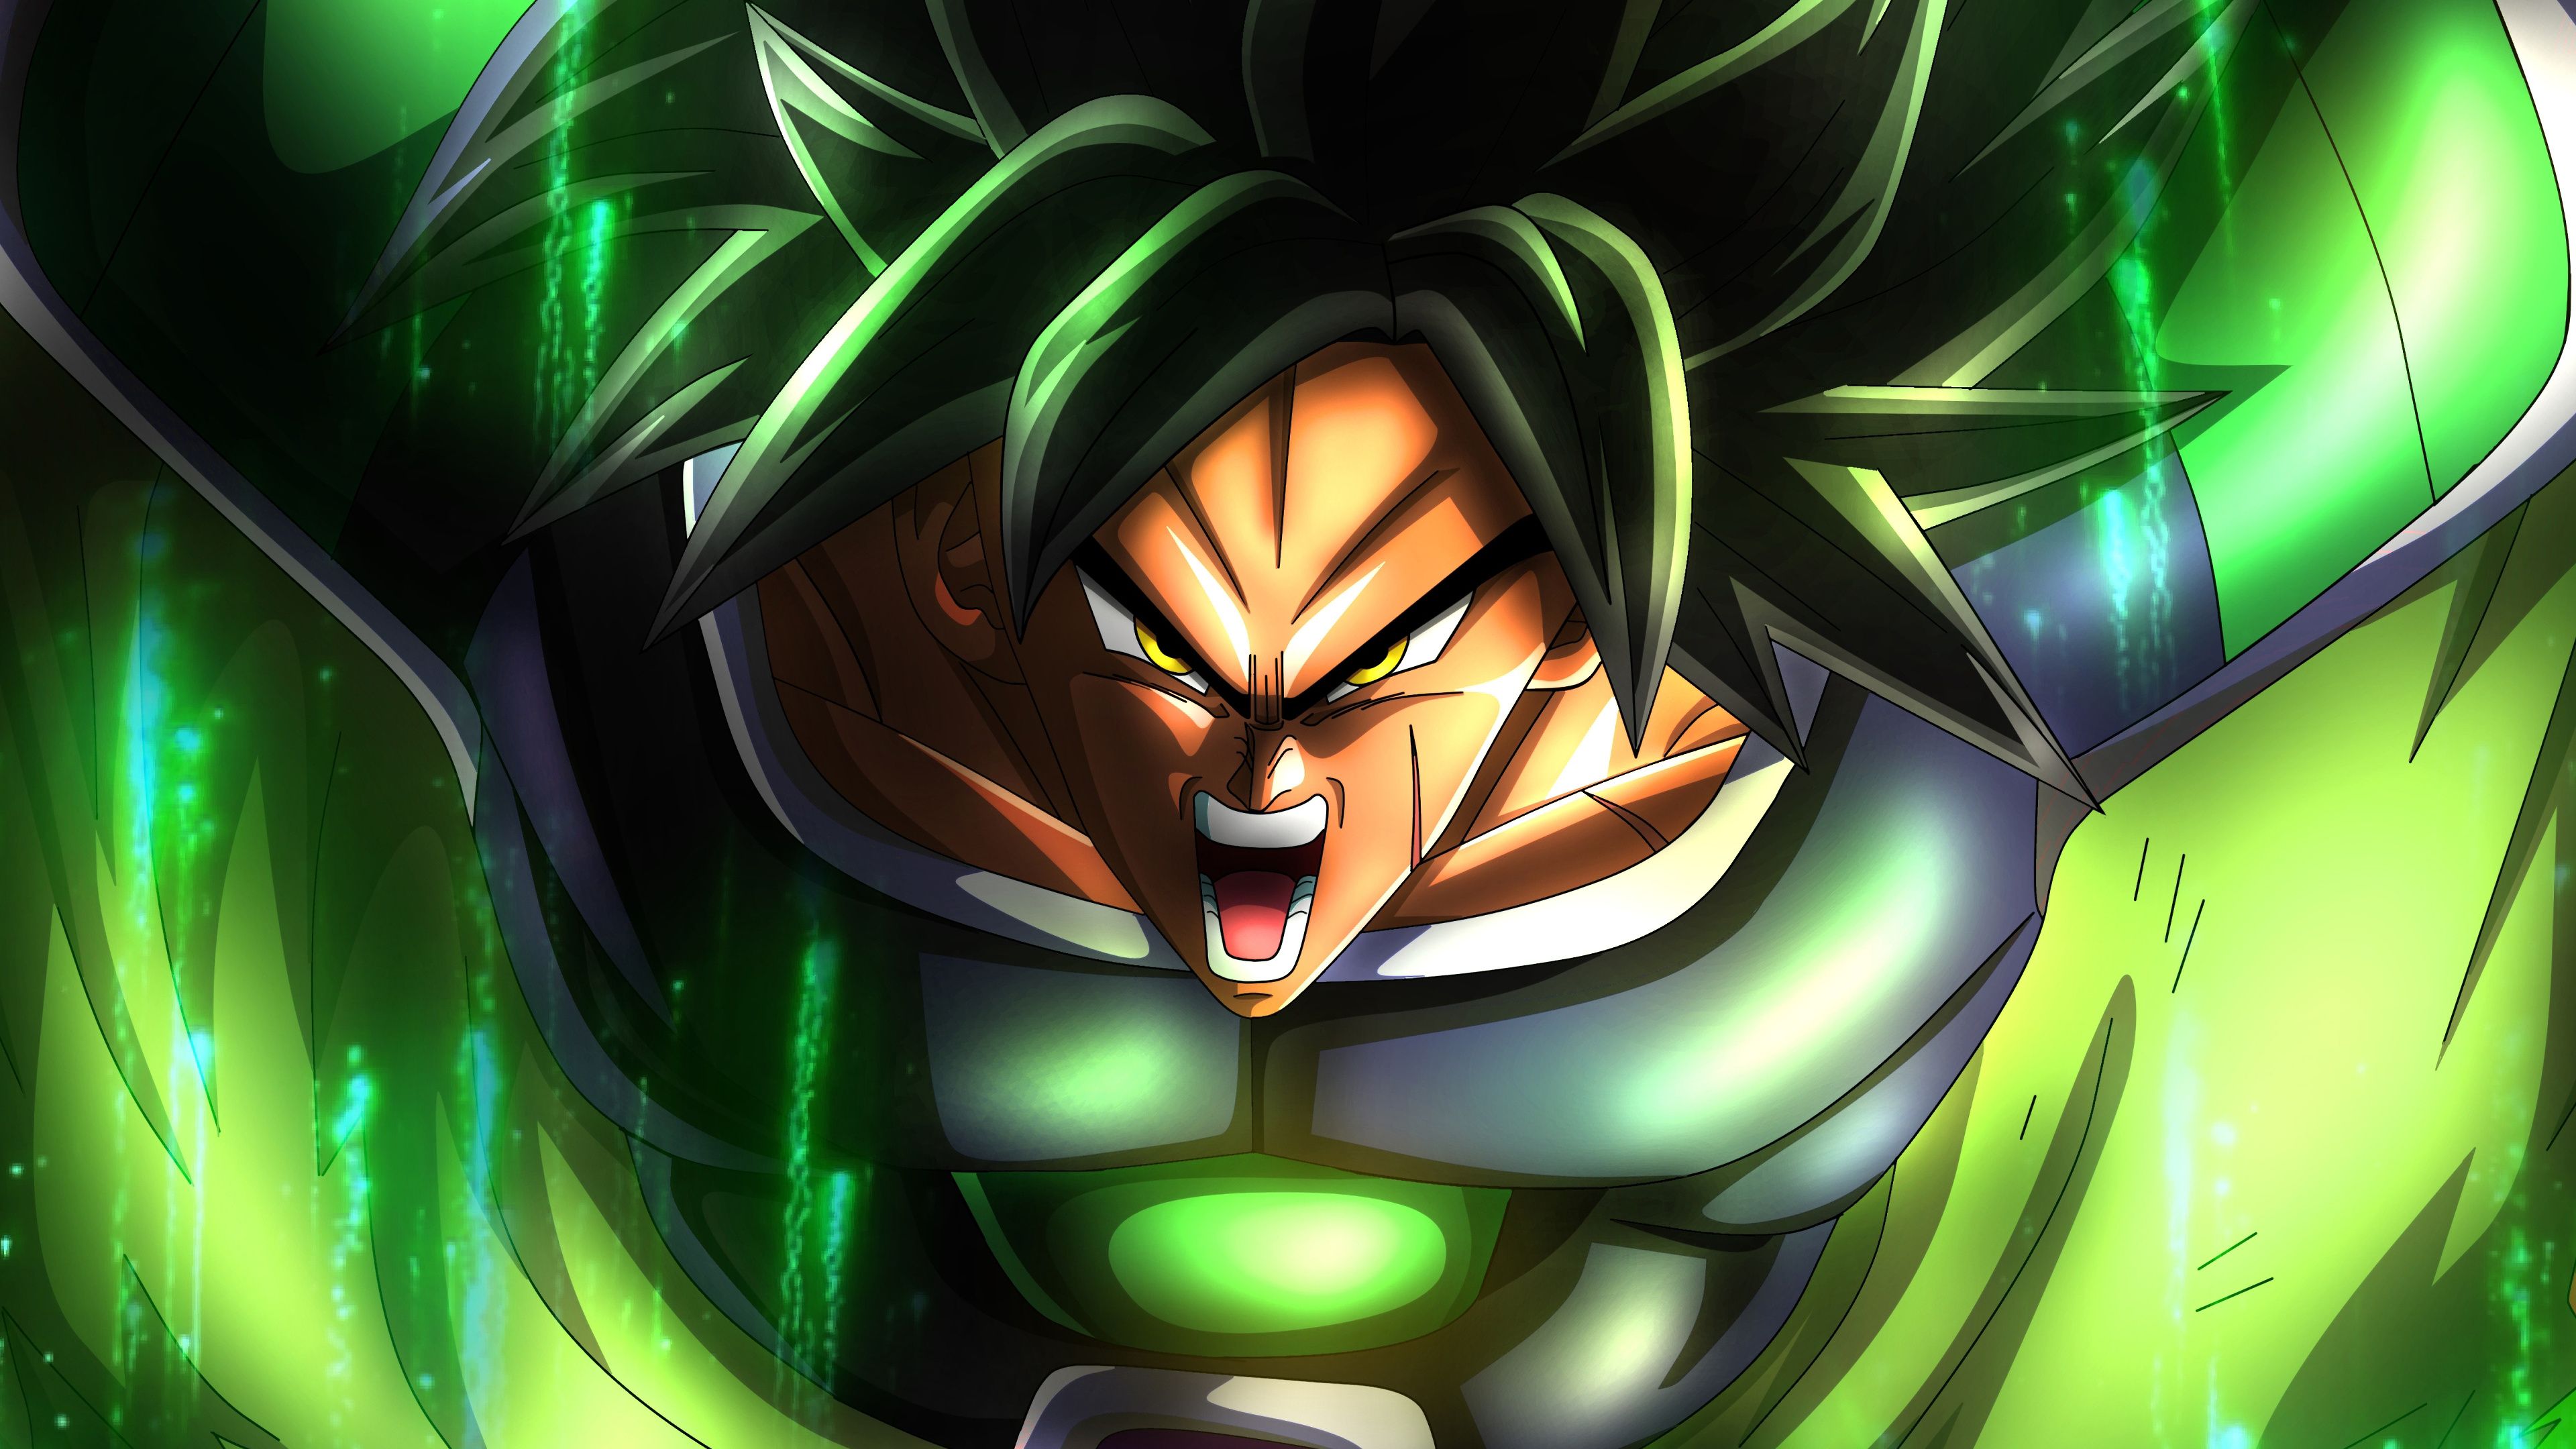 6 Dragon Ball Super Broly Wallpaper 4k Pc | Images and Photos finder